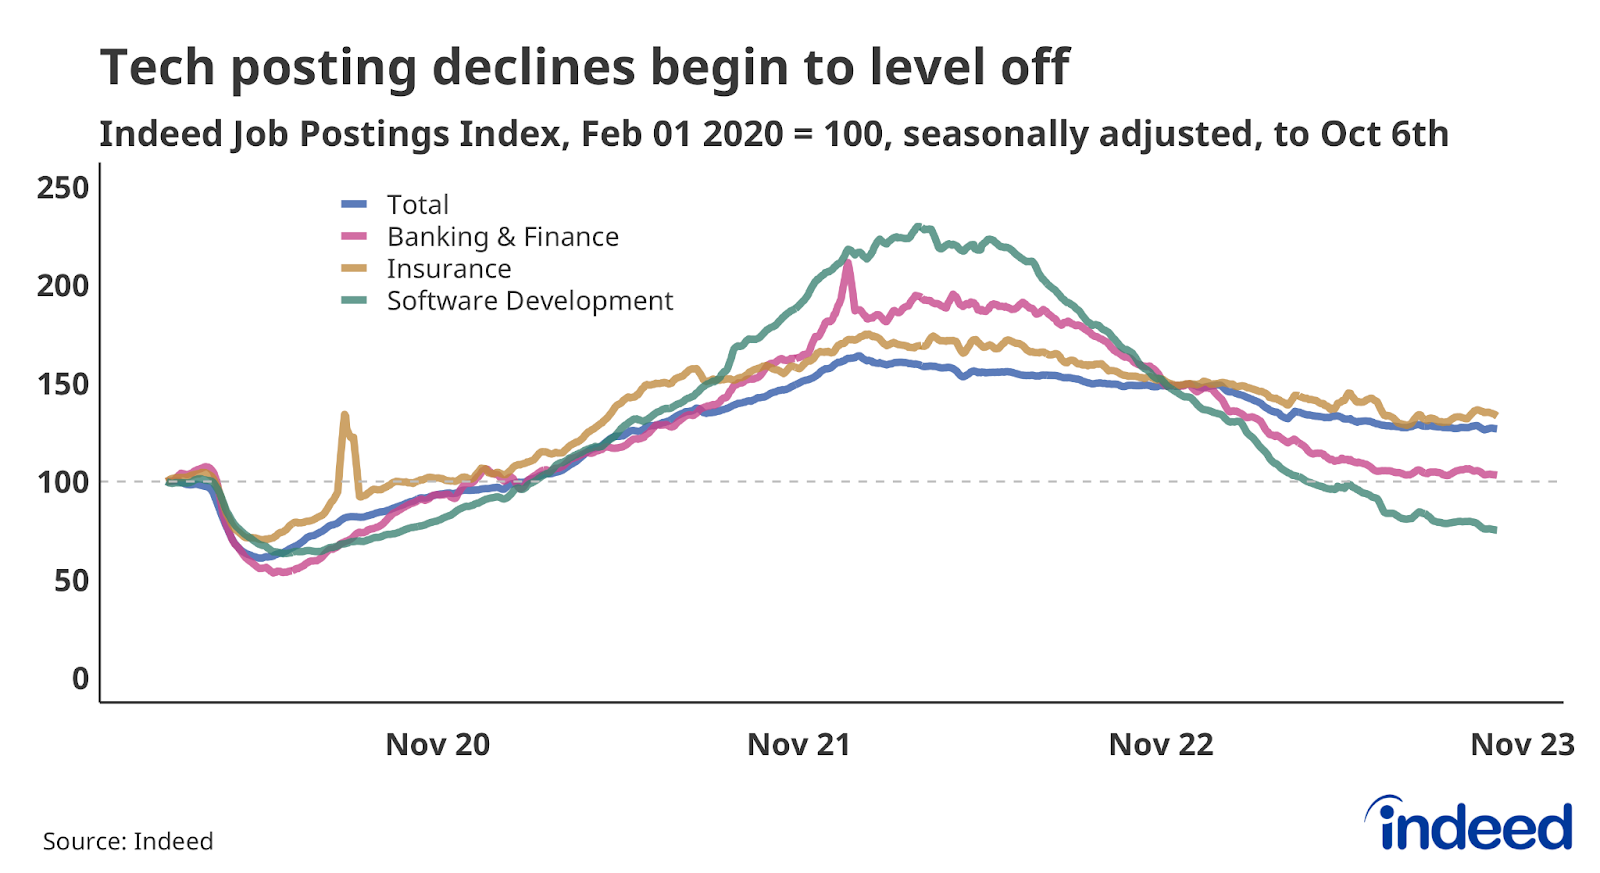 Line chart titled "Tech posting declines begin to level off," shows job postings in Banking & Finance, Insurance, and Software Development to October 6, 2023. Banking & Finance postings have fallen to near their pre-pandemic level.